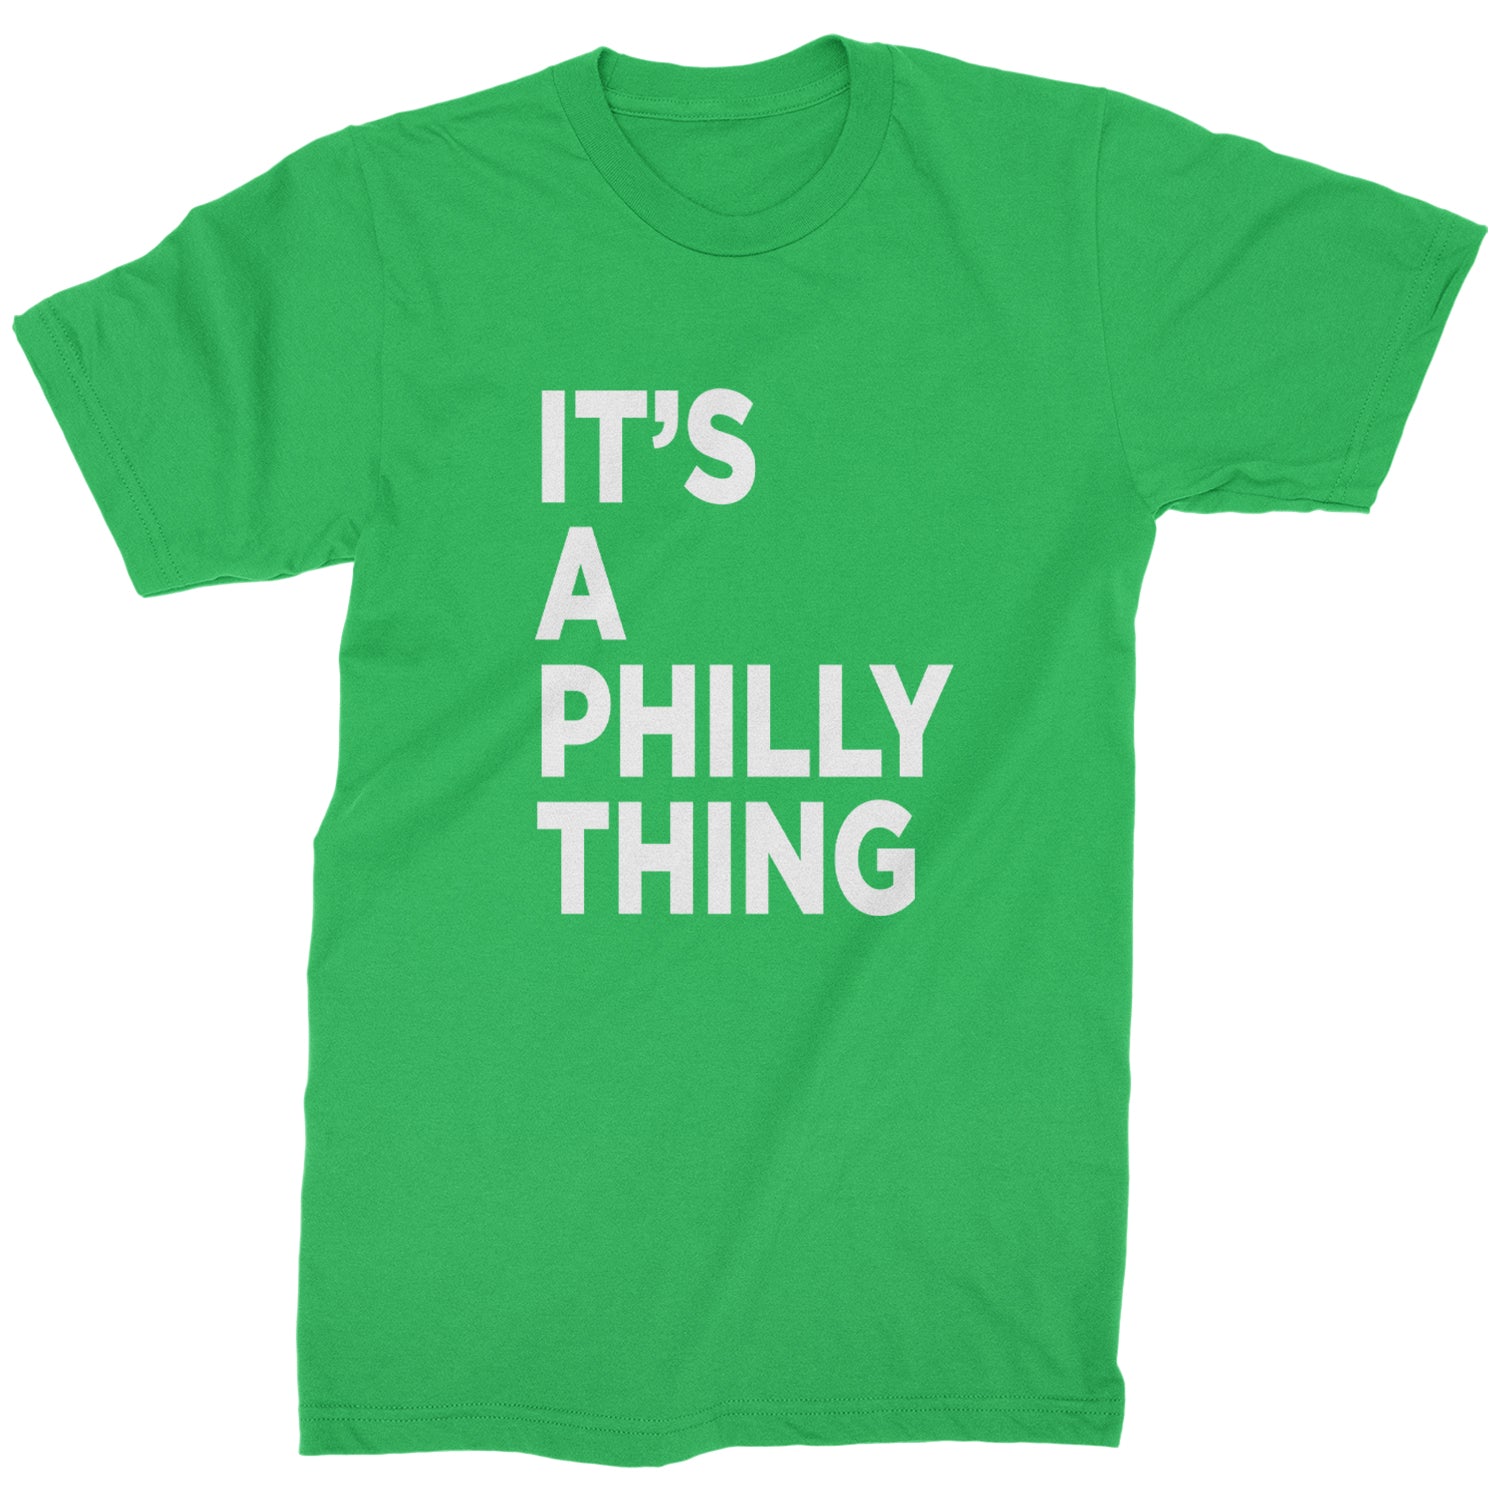 PHILLY It's A Philly Thing Mens T-shirt baseball, dilly, filly, football, jawn, morgan, Philadelphia, philli by Expression Tees